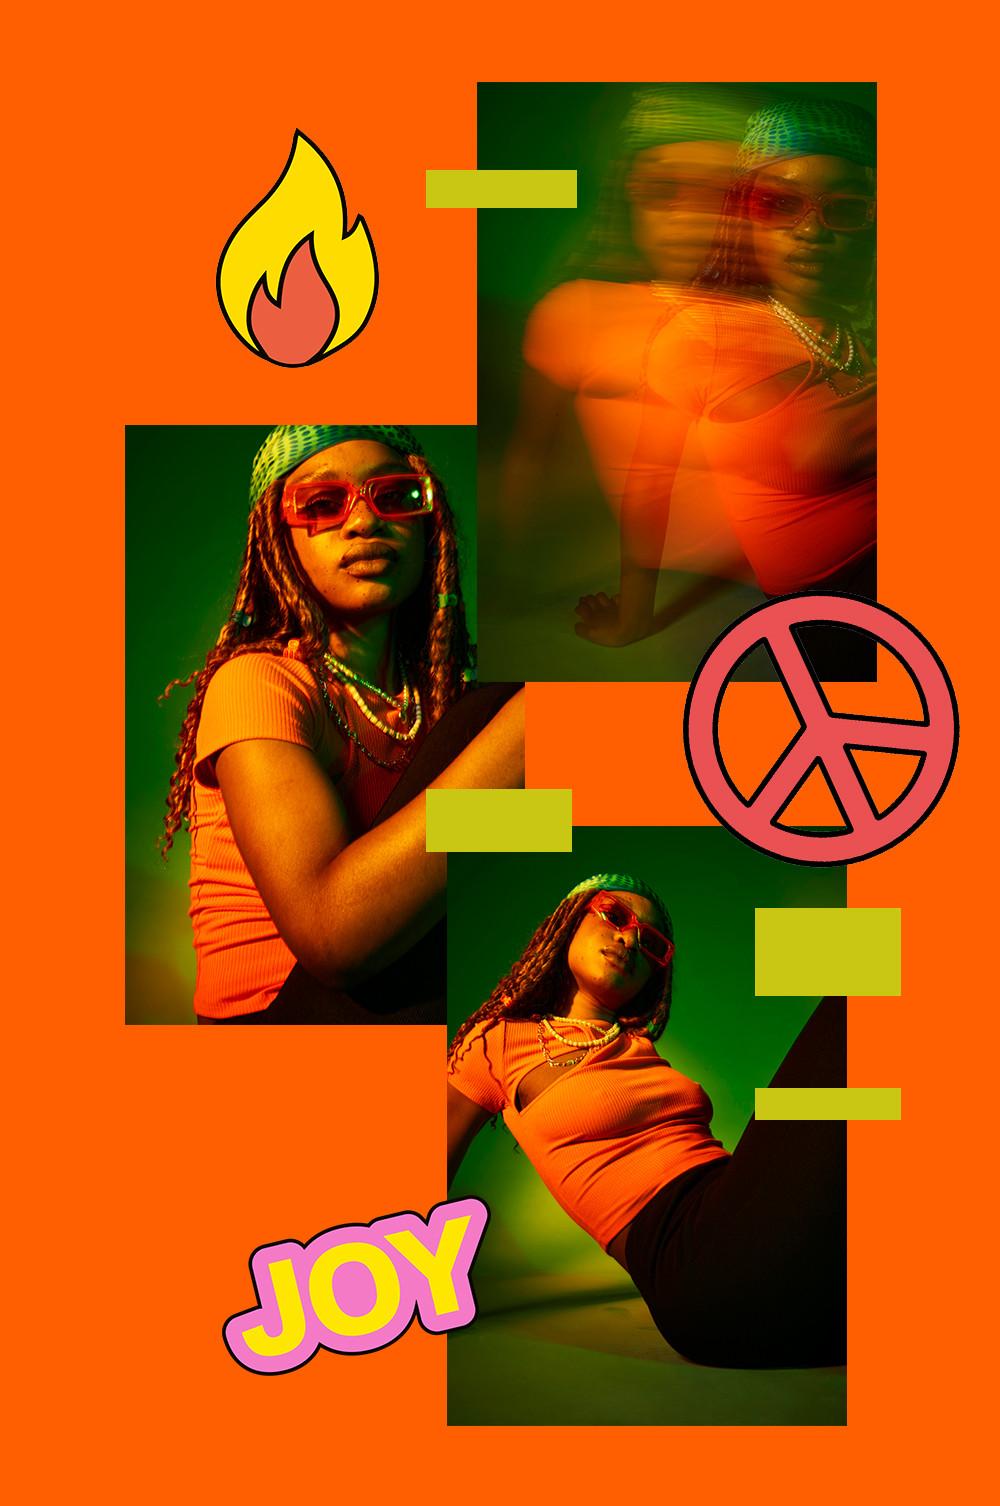 Model wears orange top, black flares and a green headscarf